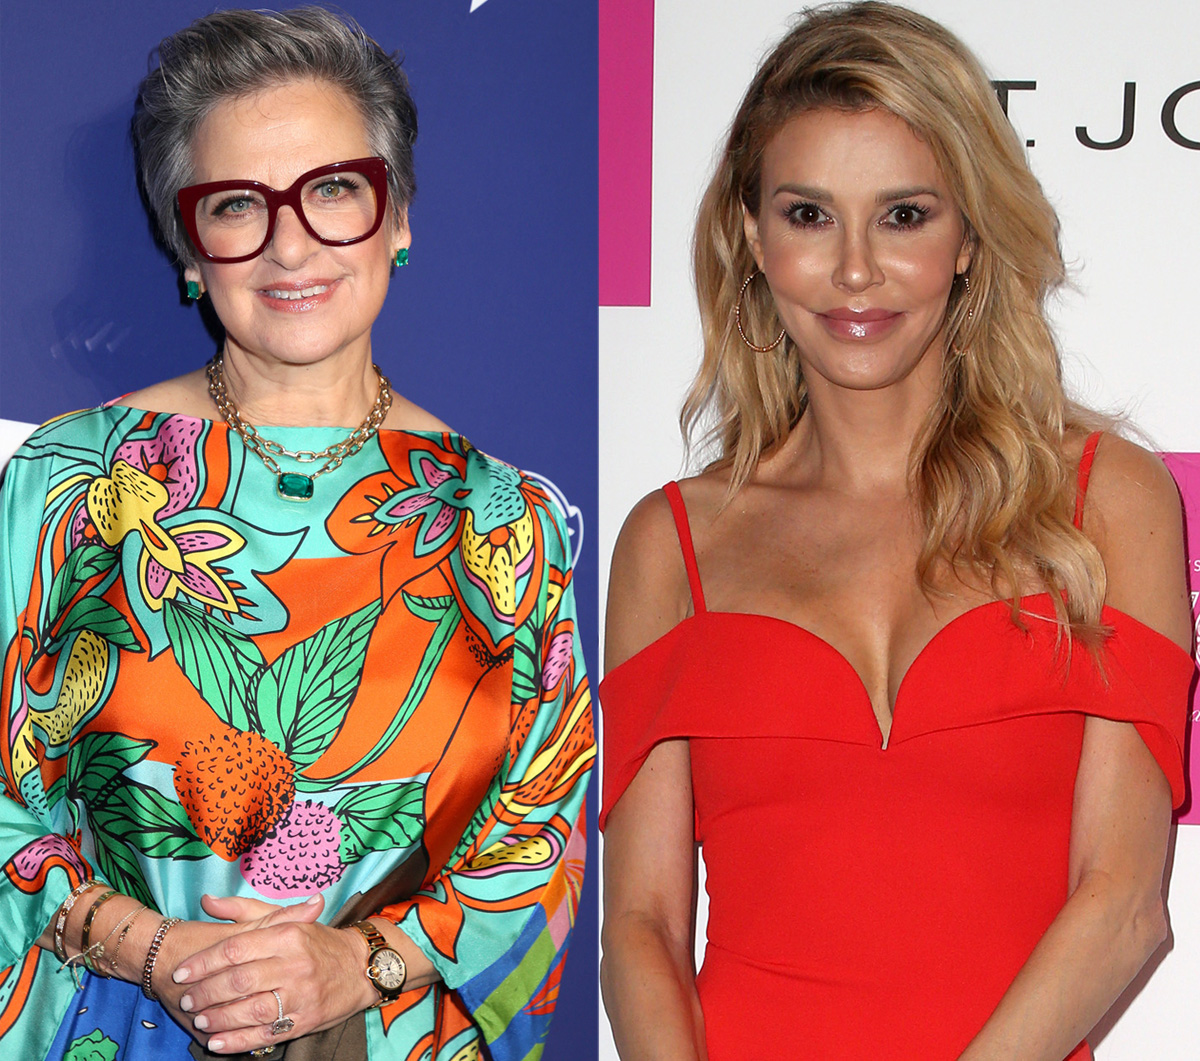 Brandi Glanville Allegedly Touched Caroline Manzo’s ‘Breast’ & ‘Vaginal Area’ – Shocking New Details From The RHUGT Incident Revealed!